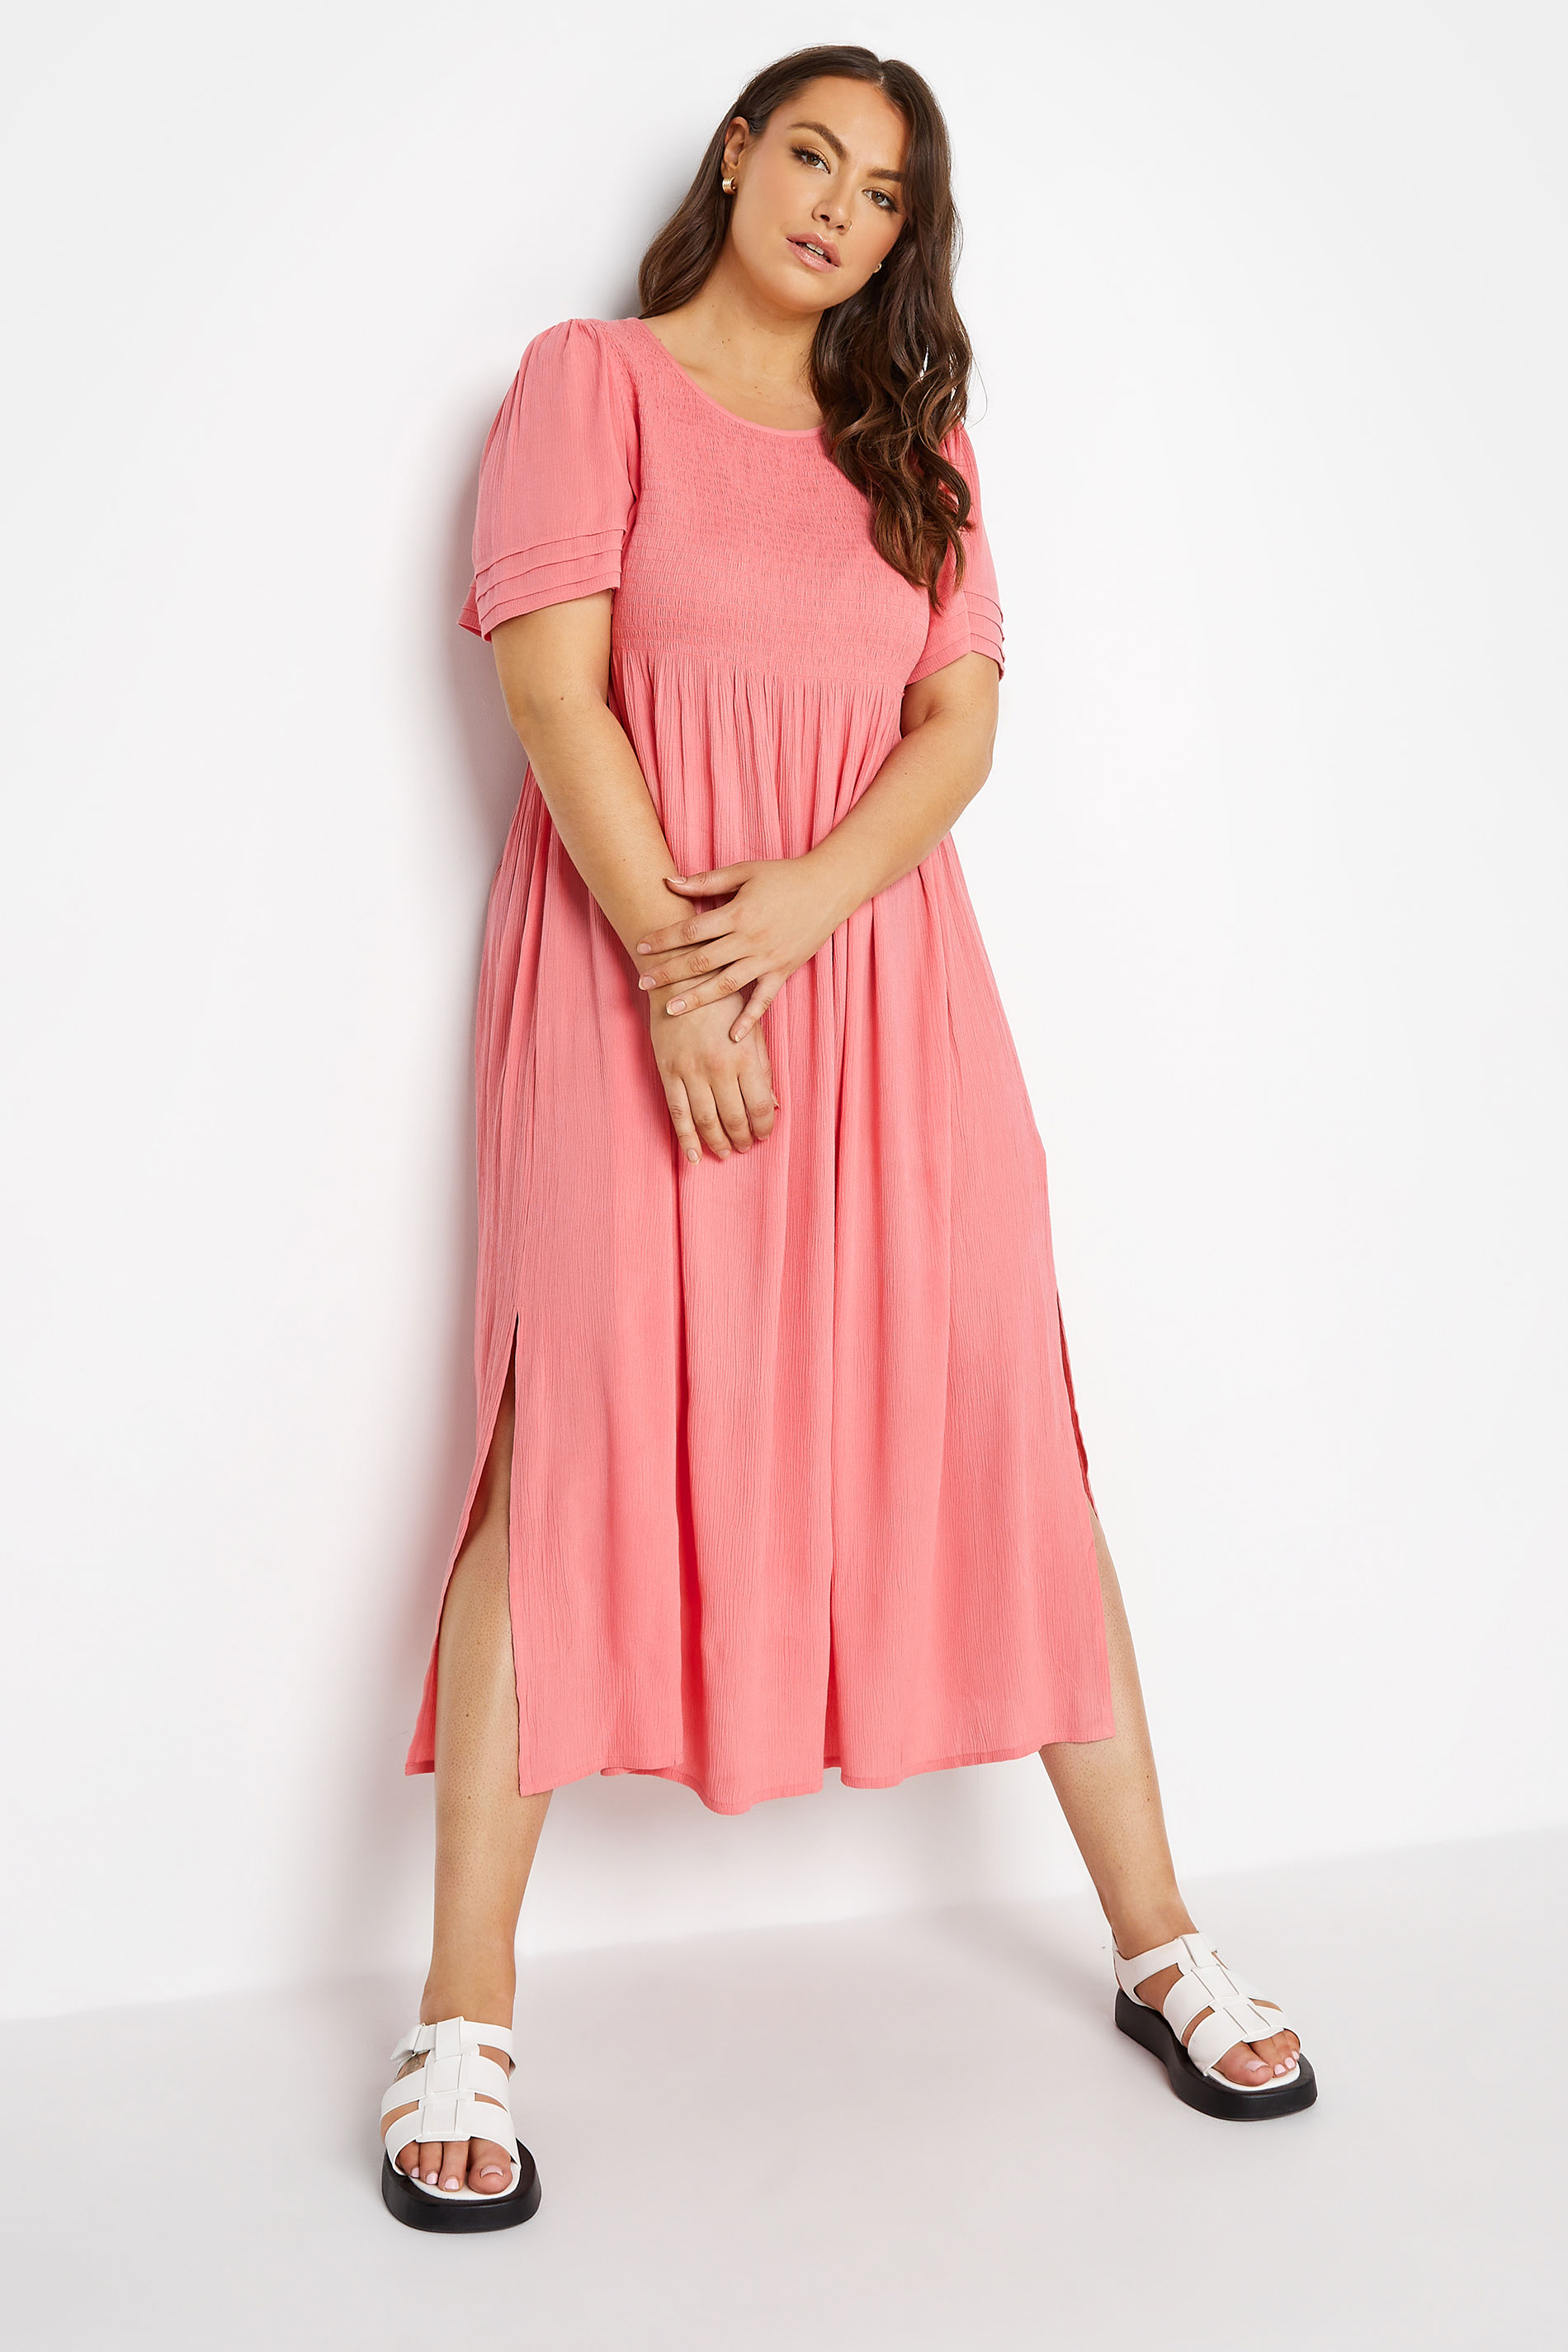 Robes Grande Taille Grande taille  Robes dÉté | LIMITED COLLECTION - Robe Rose Corail Manches Amples - OR01779